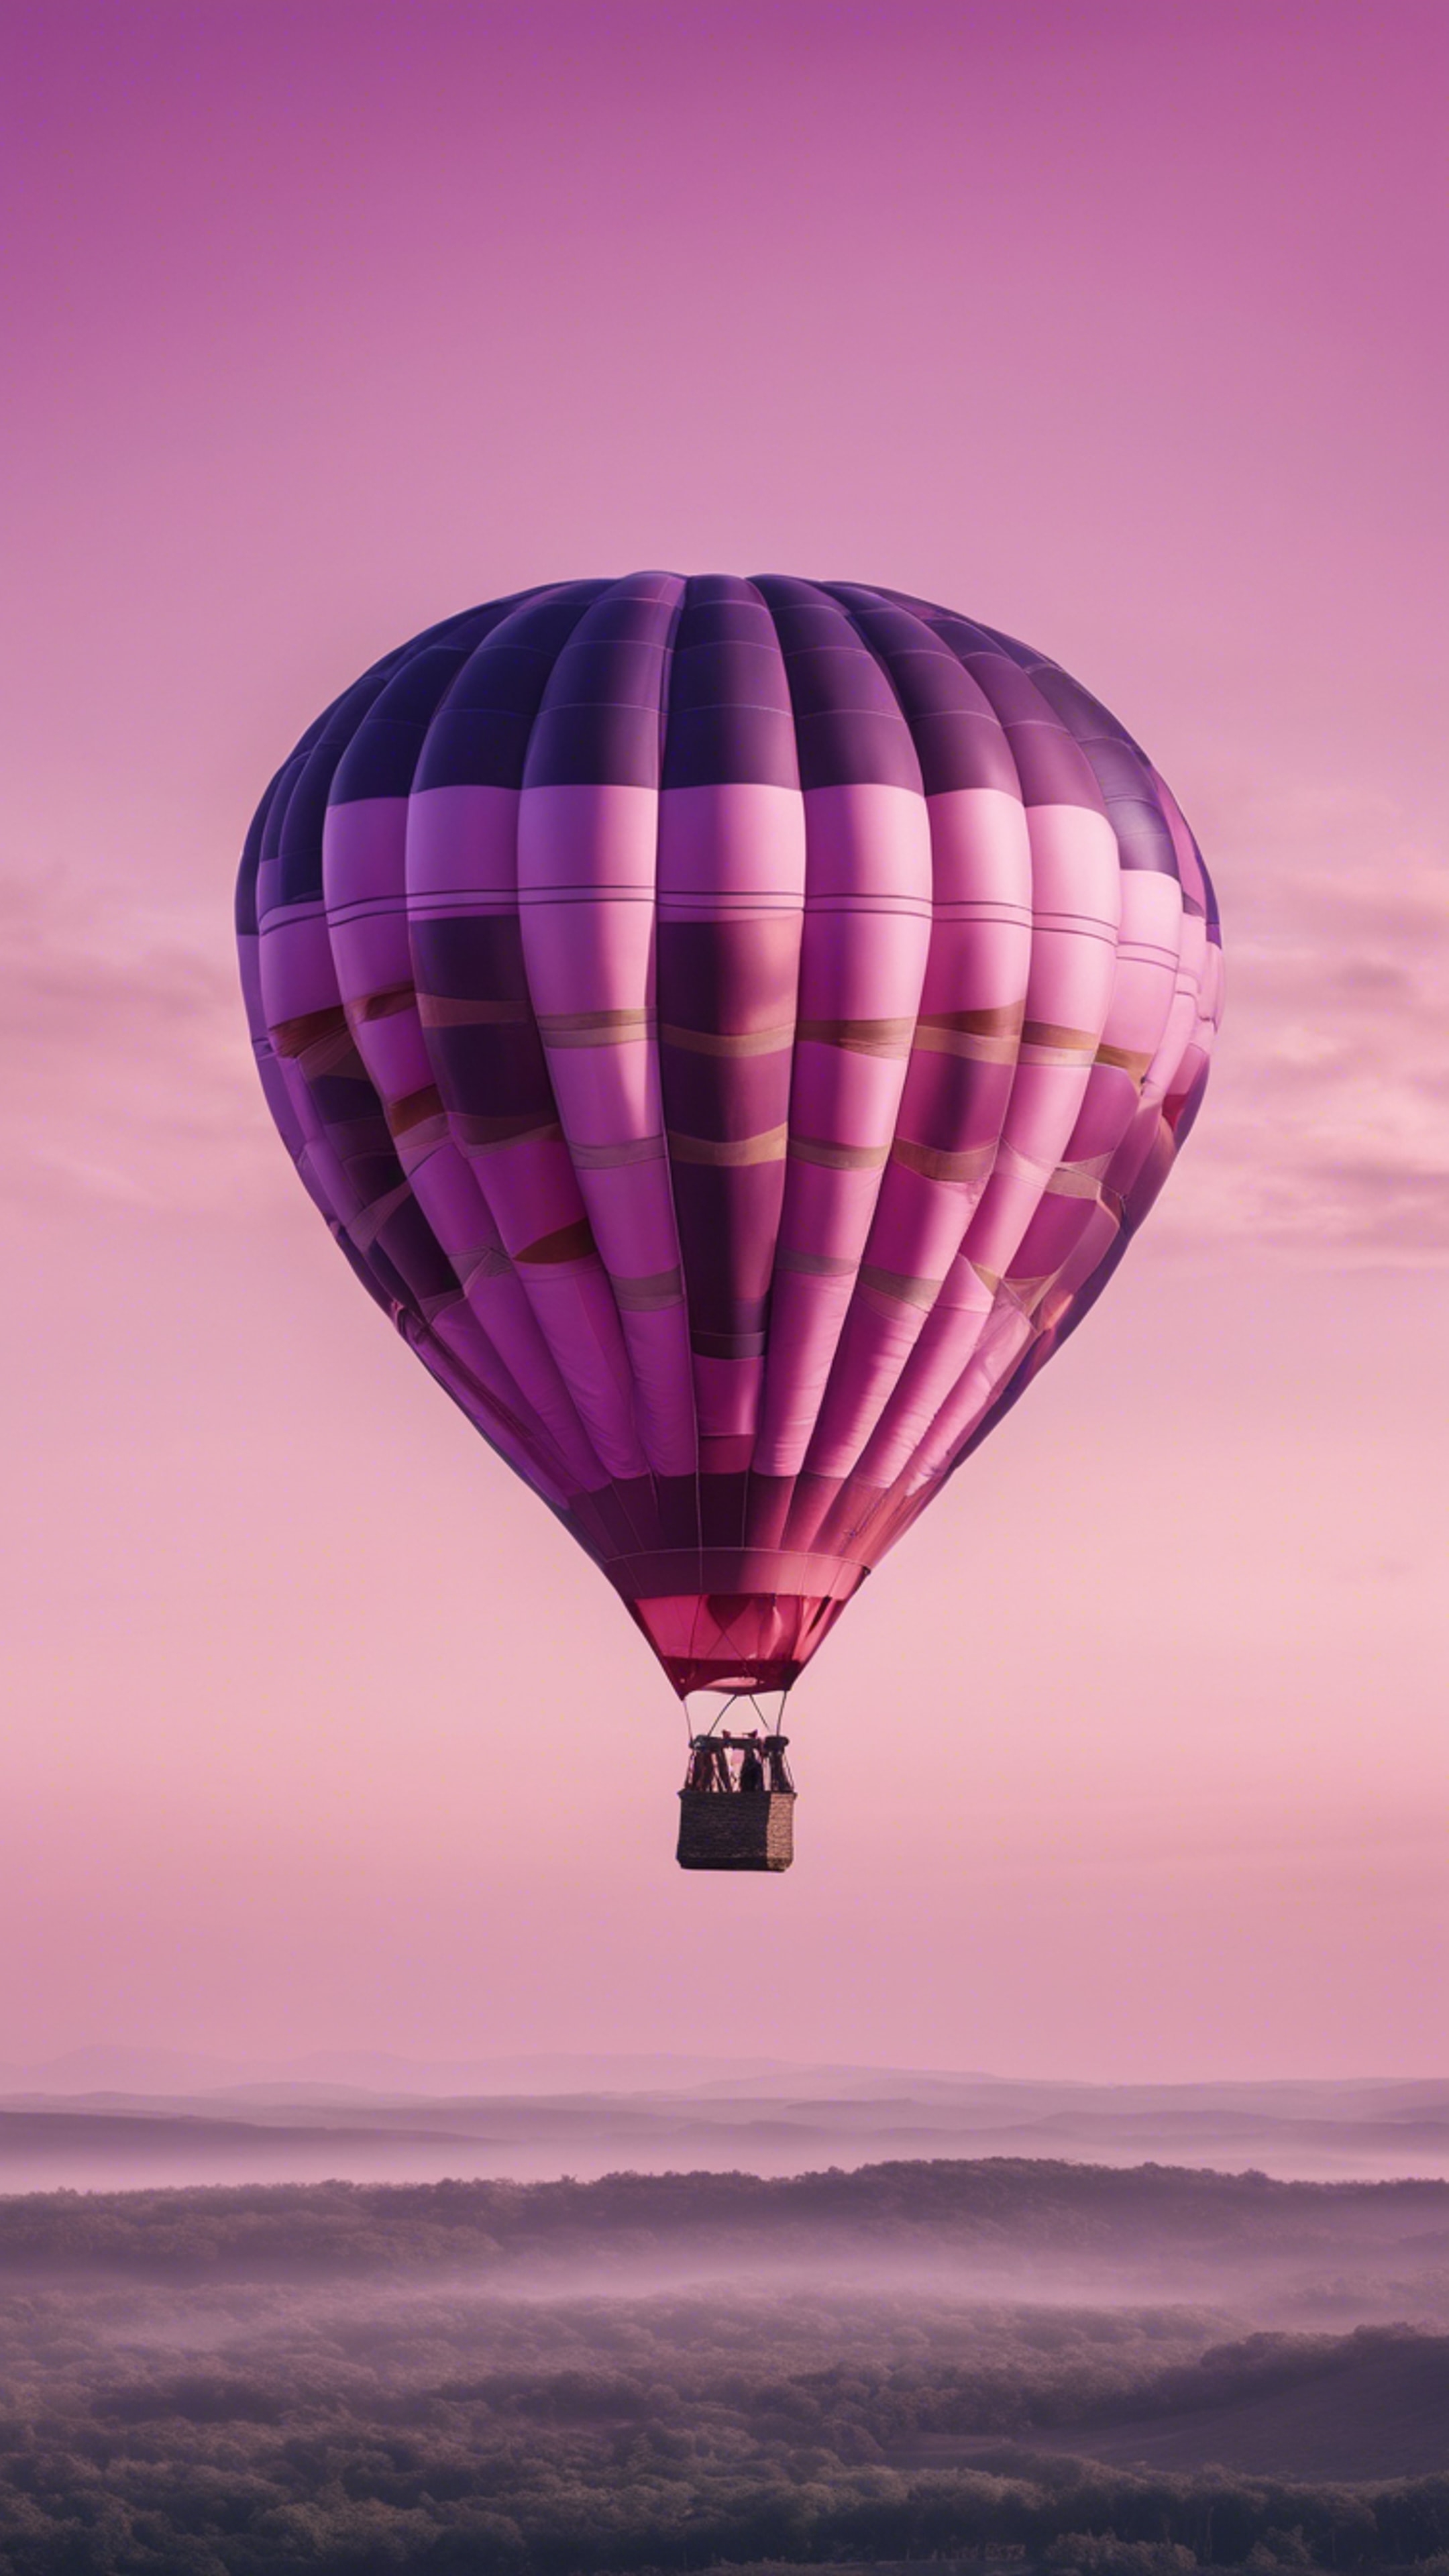 A pink and purple striped hot air balloon floating in a clear morning sky. Tapeta[24bb758d911f4cfb8c8f]